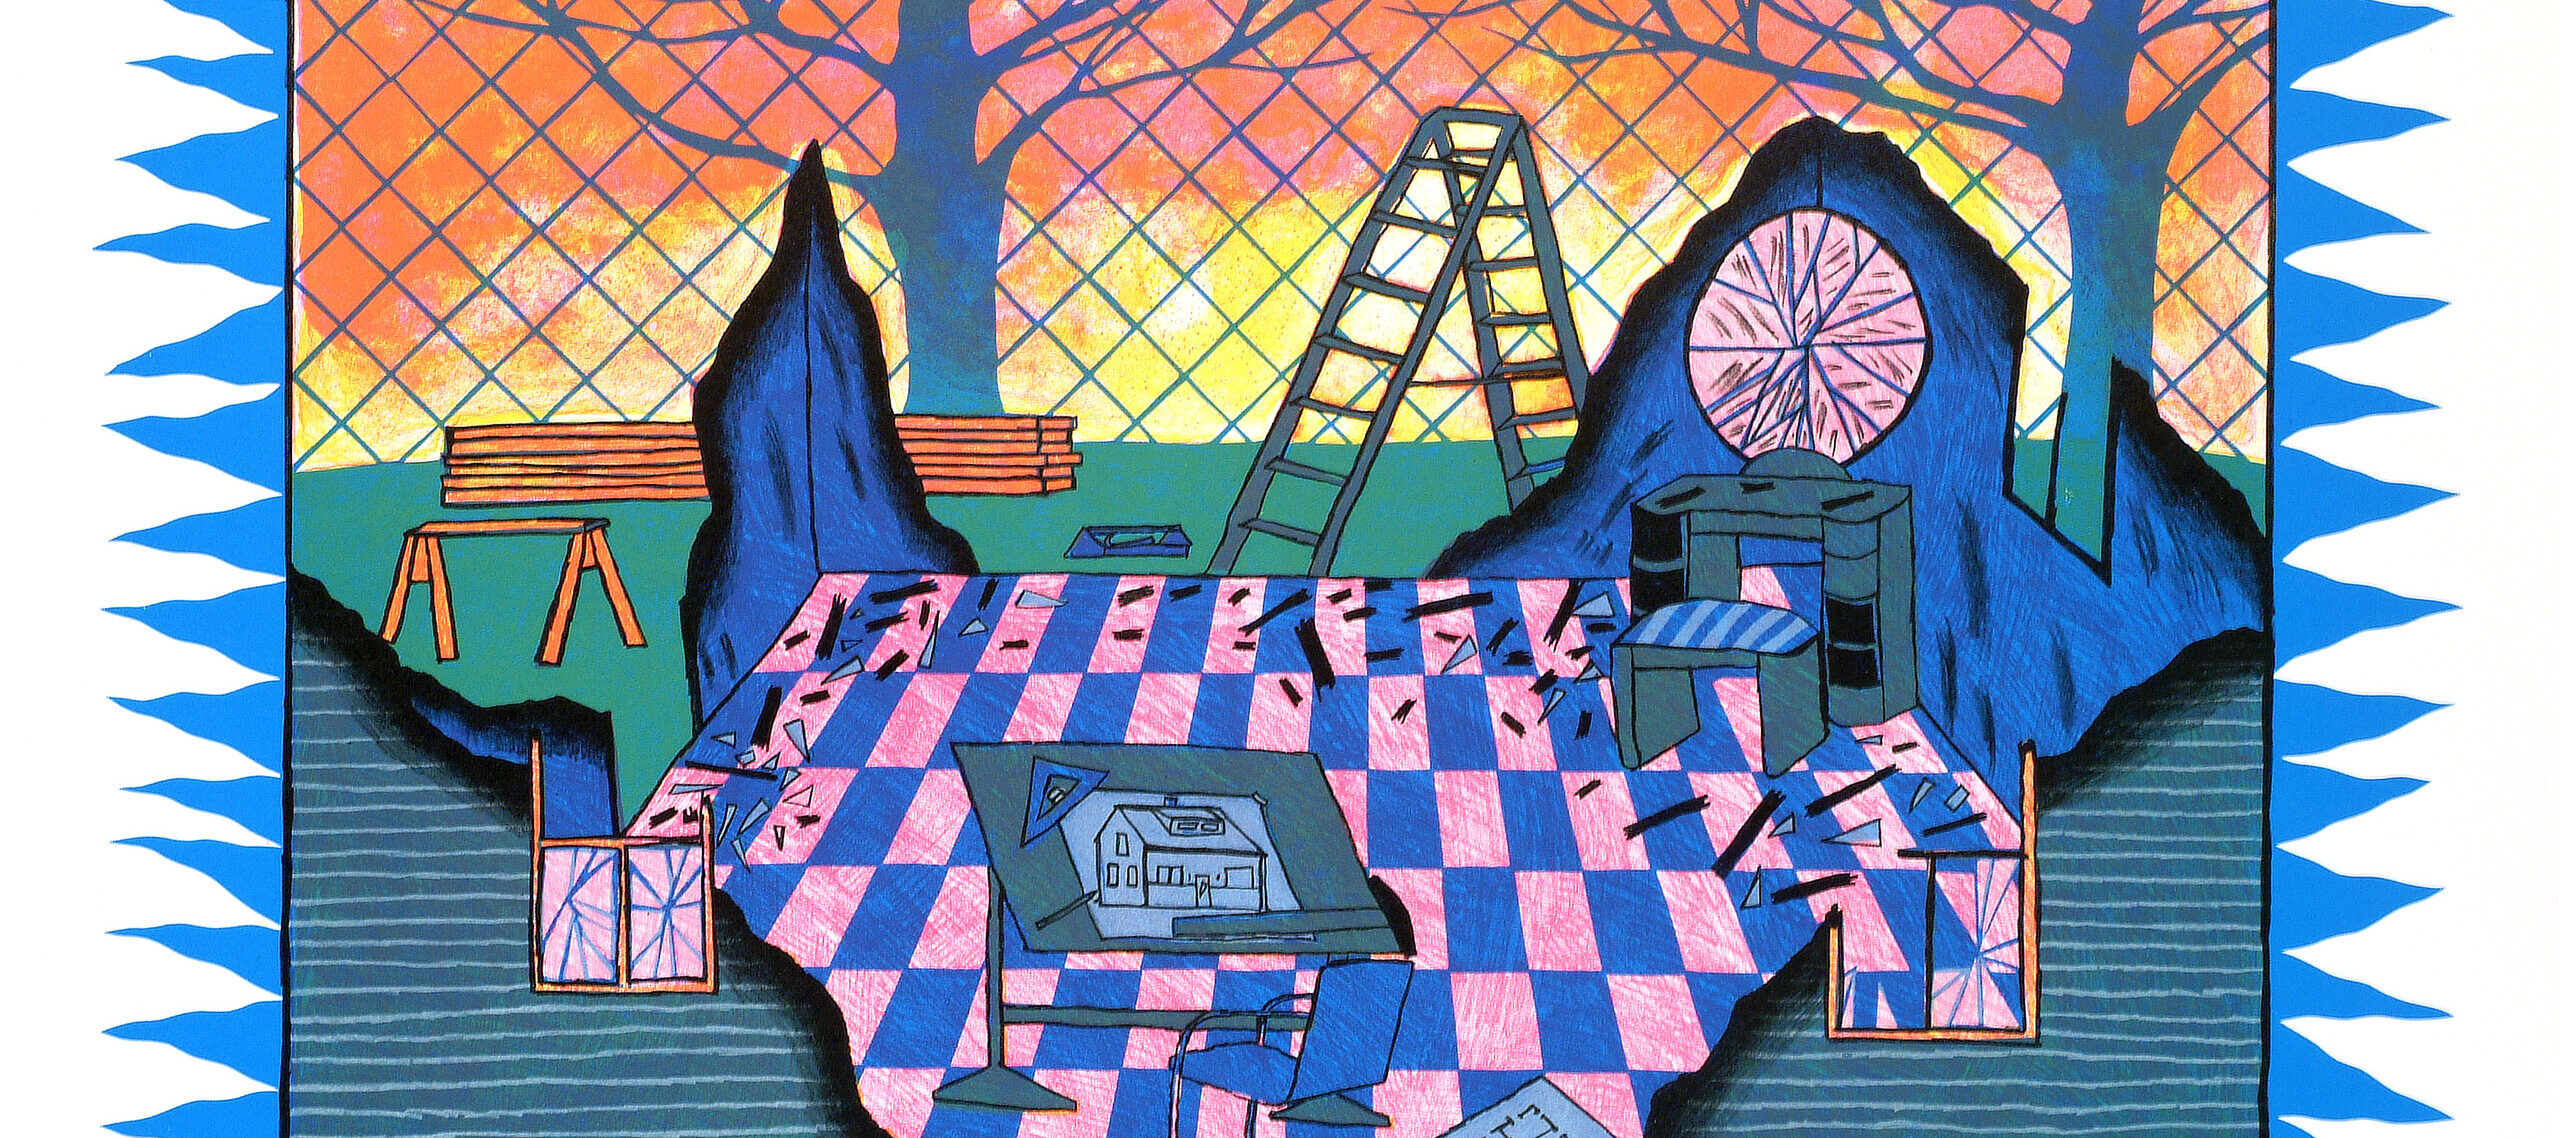 A surreal garden scene shows a park covered in a large gingham picnic blanket, a ladder, chairs standing on the blanket, and trees and a fence in the background. The scene seems surreal since the colors are not natural; they are bright pink tones and in the background, the sky seems like it is burning.